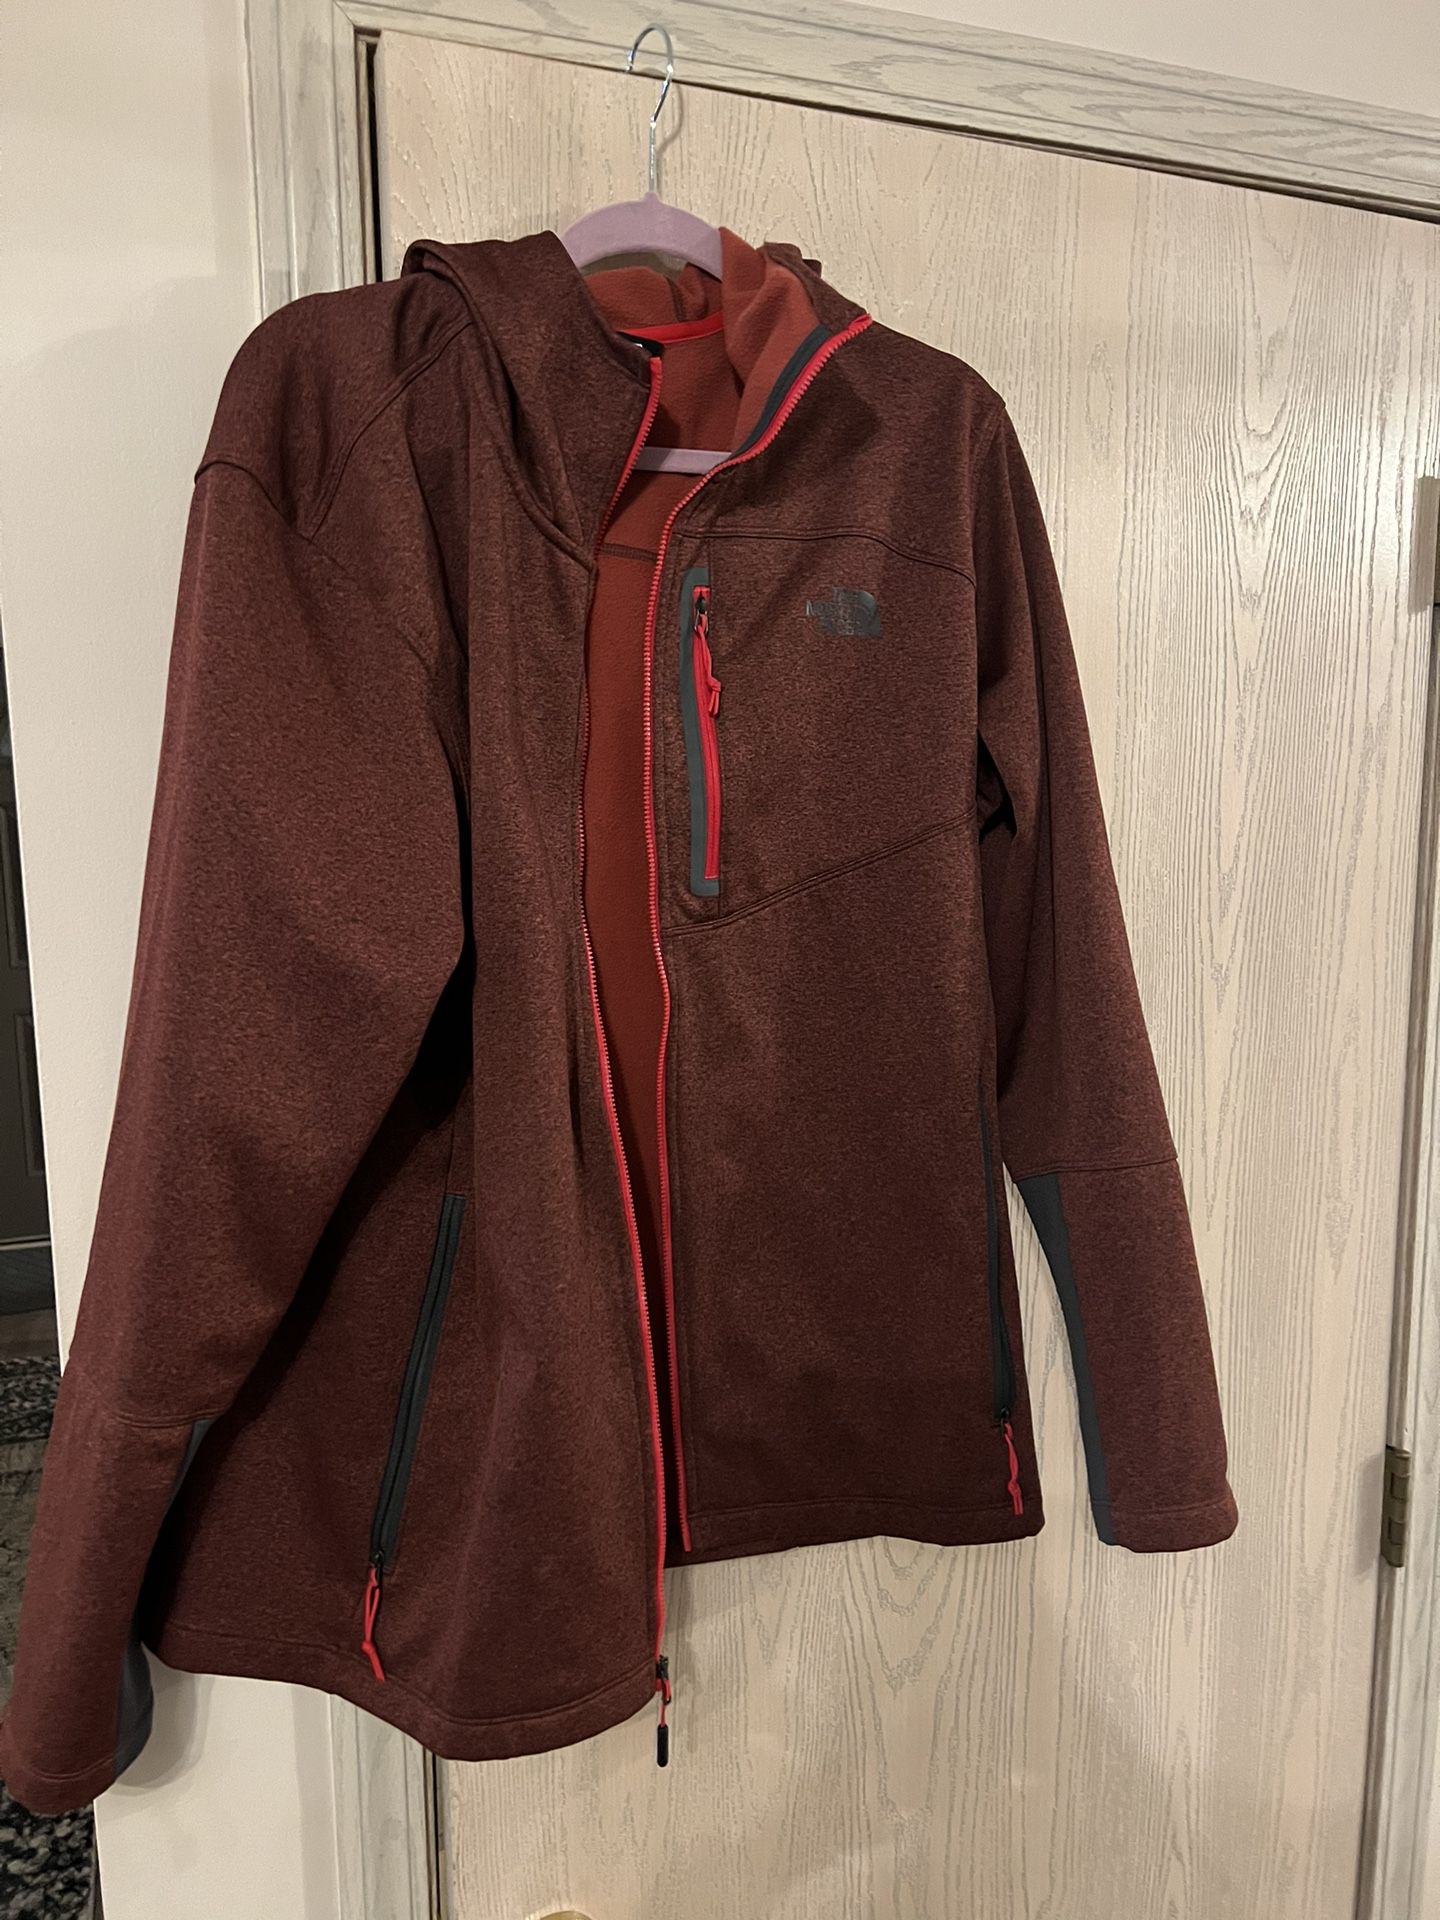 North Face Men’s Red And Grey Jacket